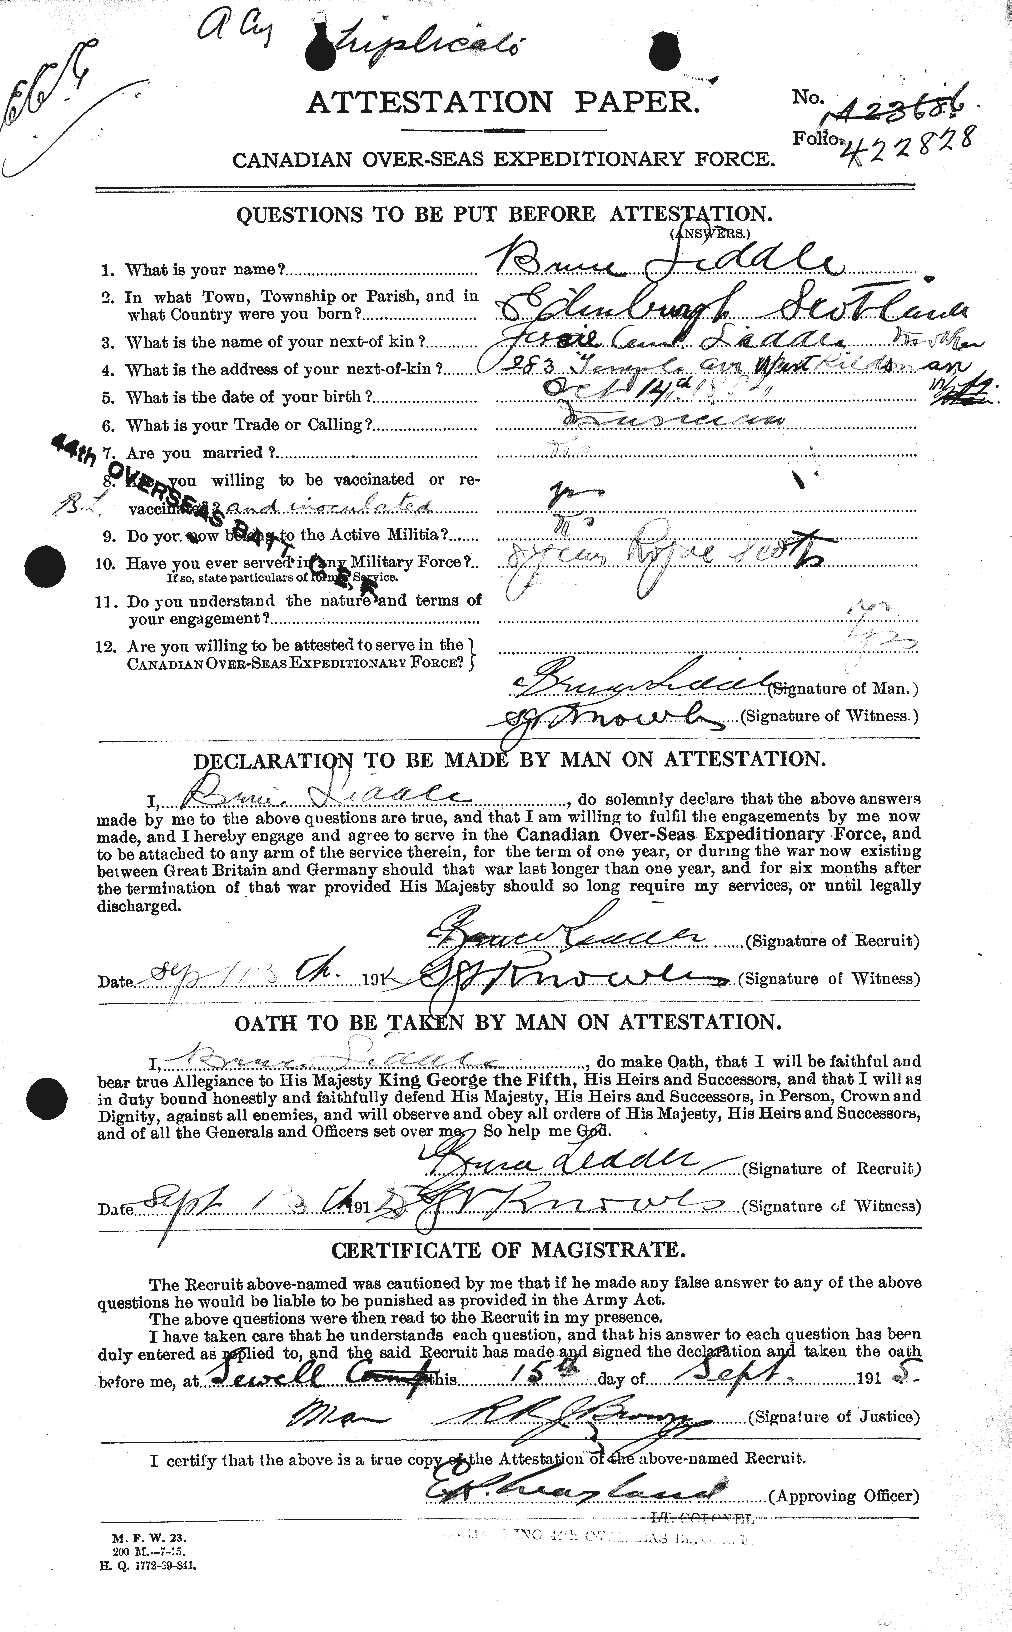 Personnel Records of the First World War - CEF 465304a